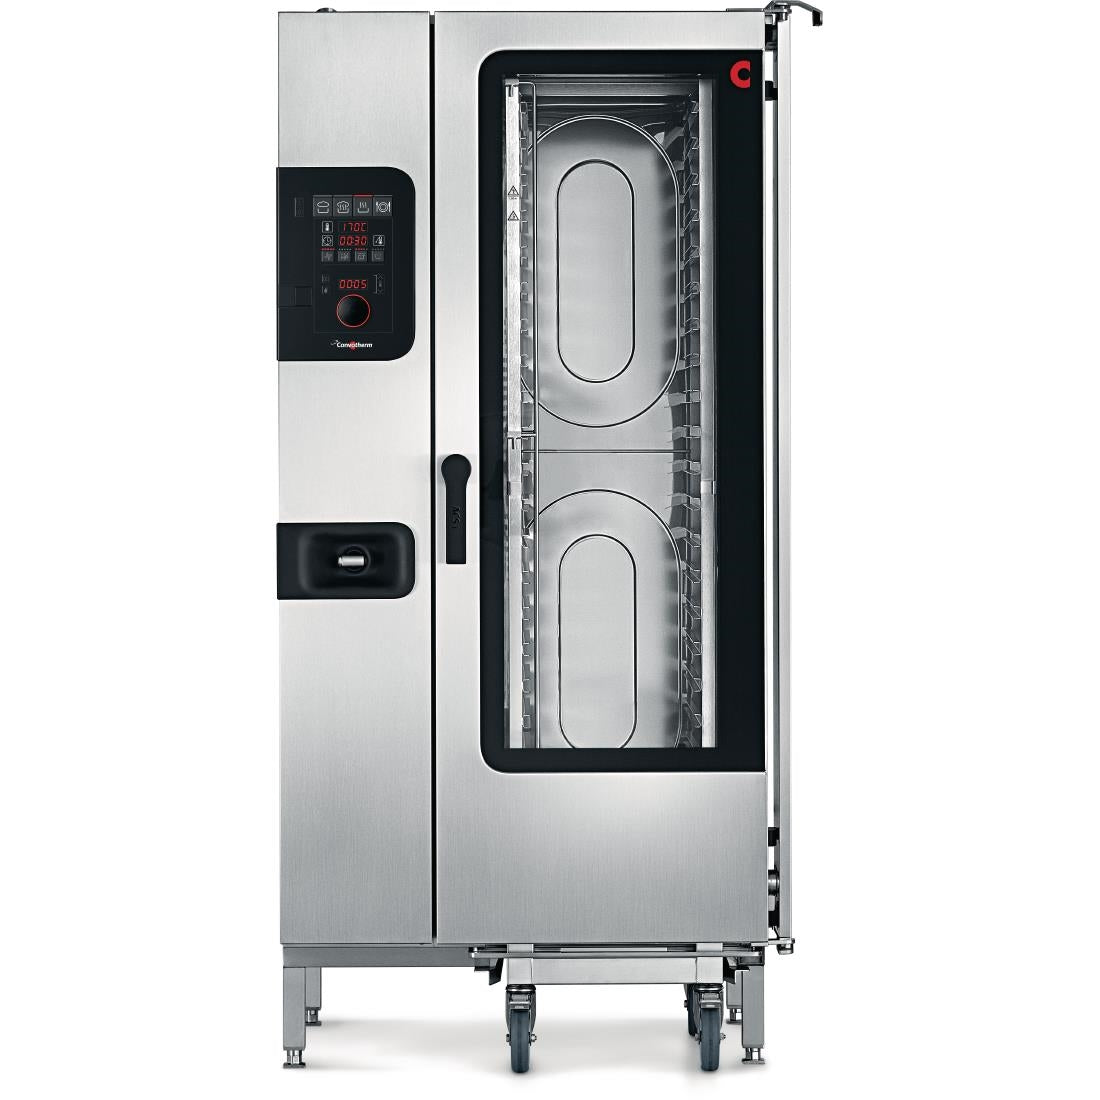 DR444-MO Convotherm 4 easyDial Combi Oven 20 x 1 x1 GN Grid JD Catering Equipment Solutions Ltd